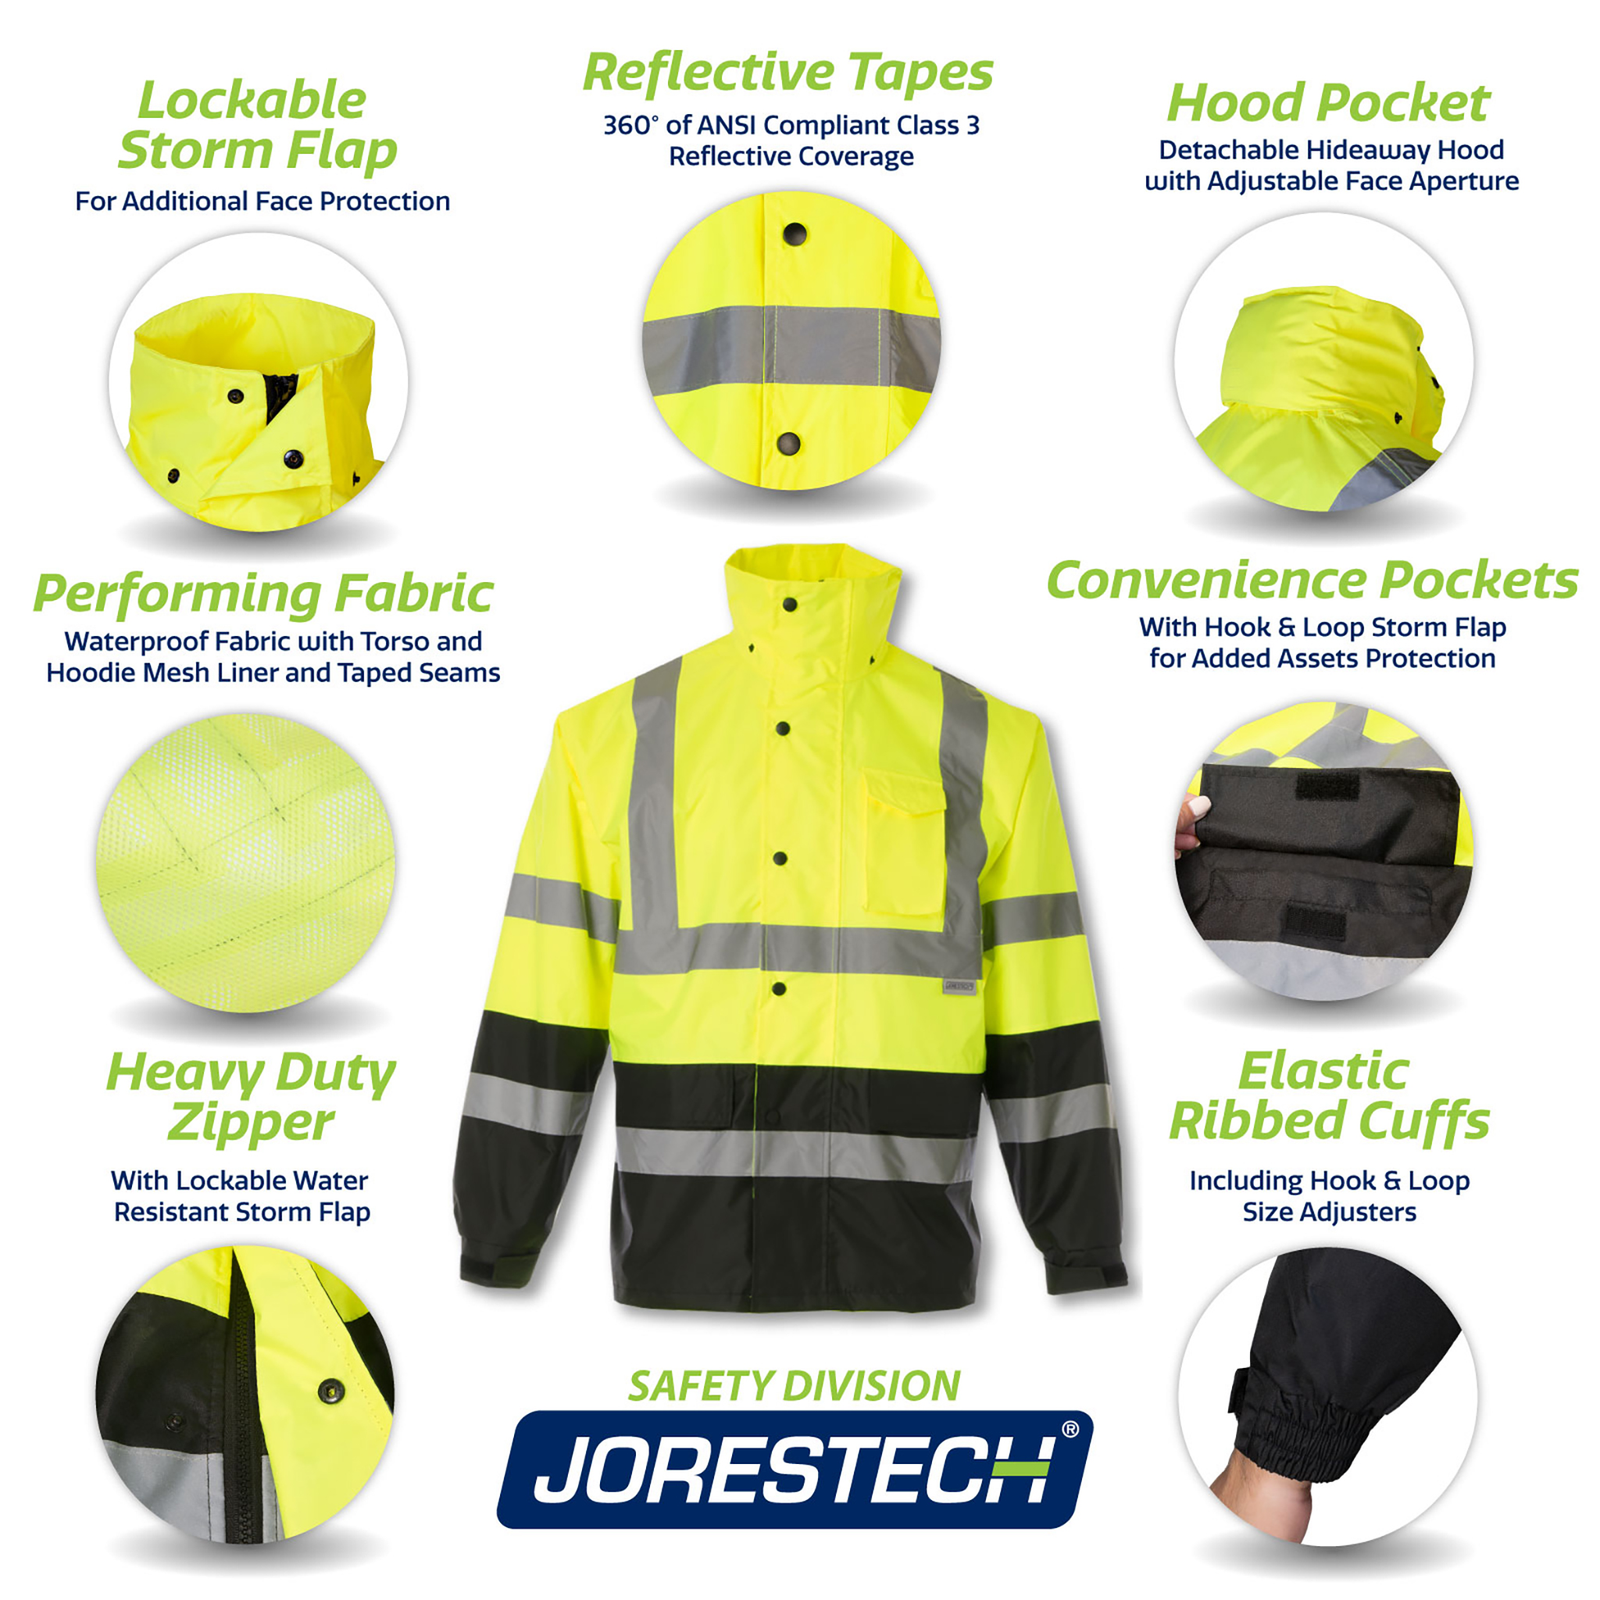 Features the yellow/lime rain jacket and call outs that read:. Lockable storm flap for face protection. Reflective tapes ANSI compliant class 3. Hood pocket detachable and hide away hood. Performing fabric, waterproof, mesh liner and taped seams. Multiple convenience pockets. Heavy duty zipper with additional storm flap. Elastic ribbed cuffs with hook and loop strap.